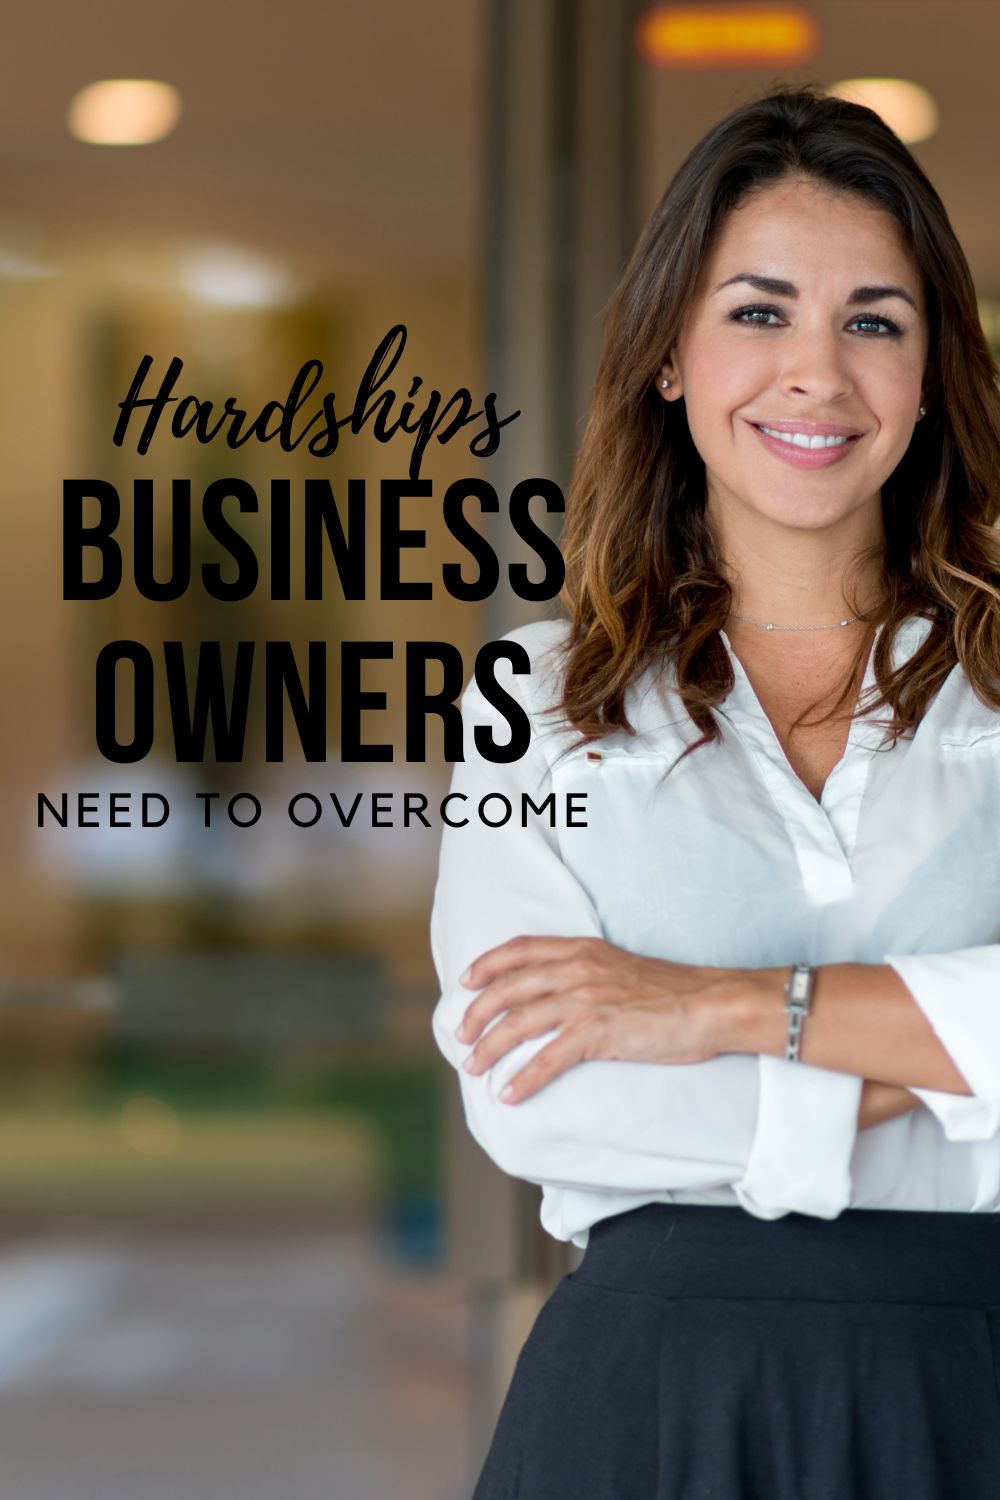 Here-are-the-hardships-Orange-County-online-business-owners-face